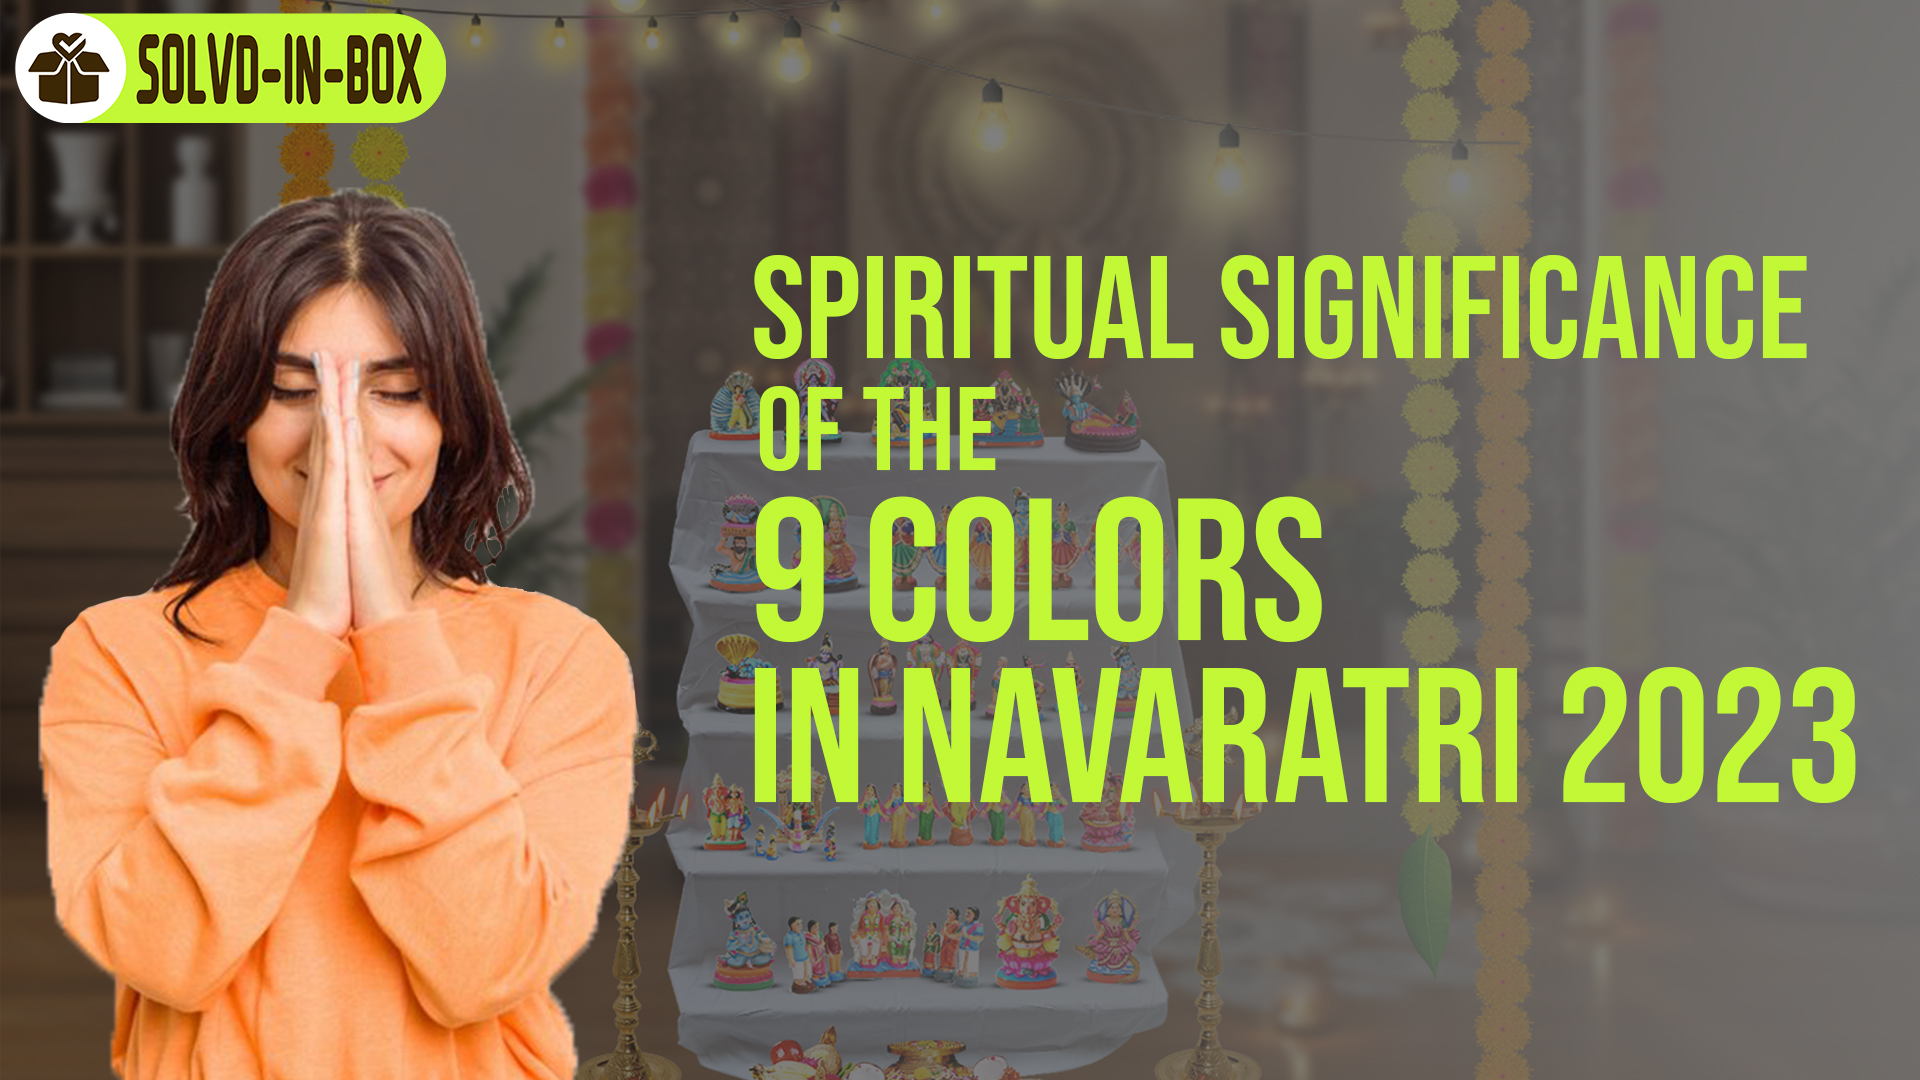 6 Spiritual Significance of the 9 Colors in Navaratri 2023